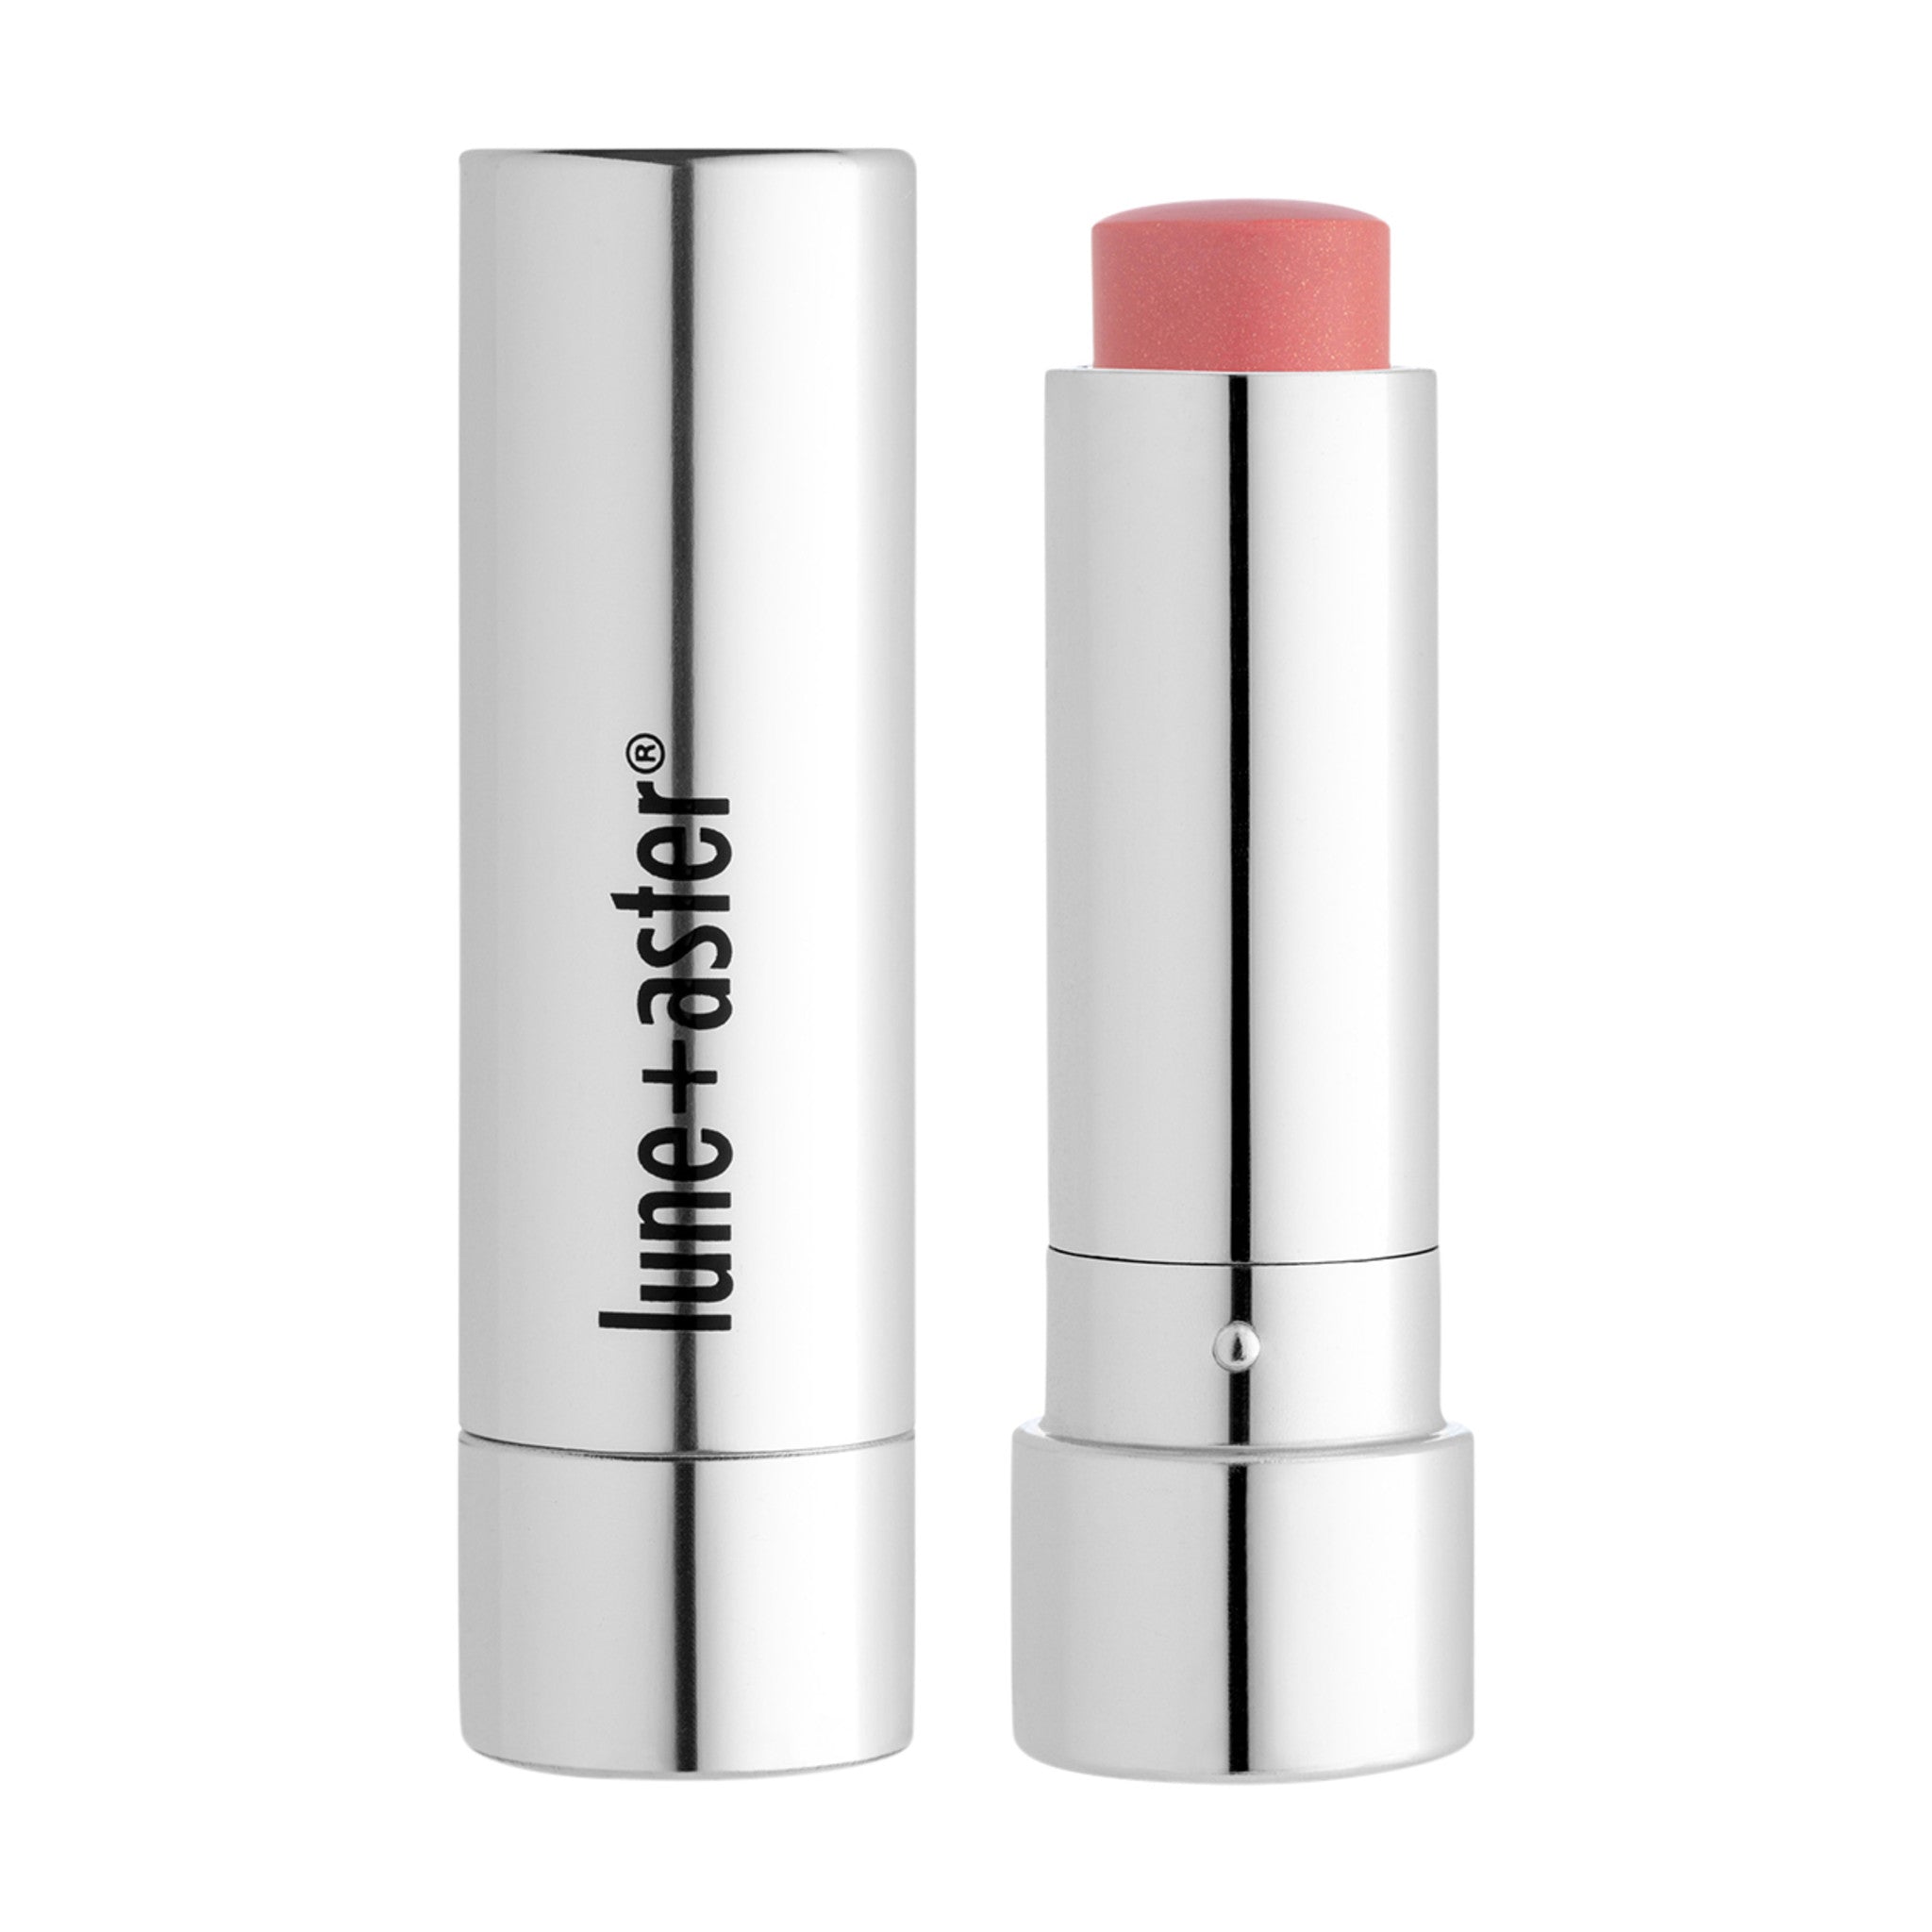 Lune+Aster Tinted Lip Balm Color/Shade variant: Lift Each Other Up main image. This product is in the color coral